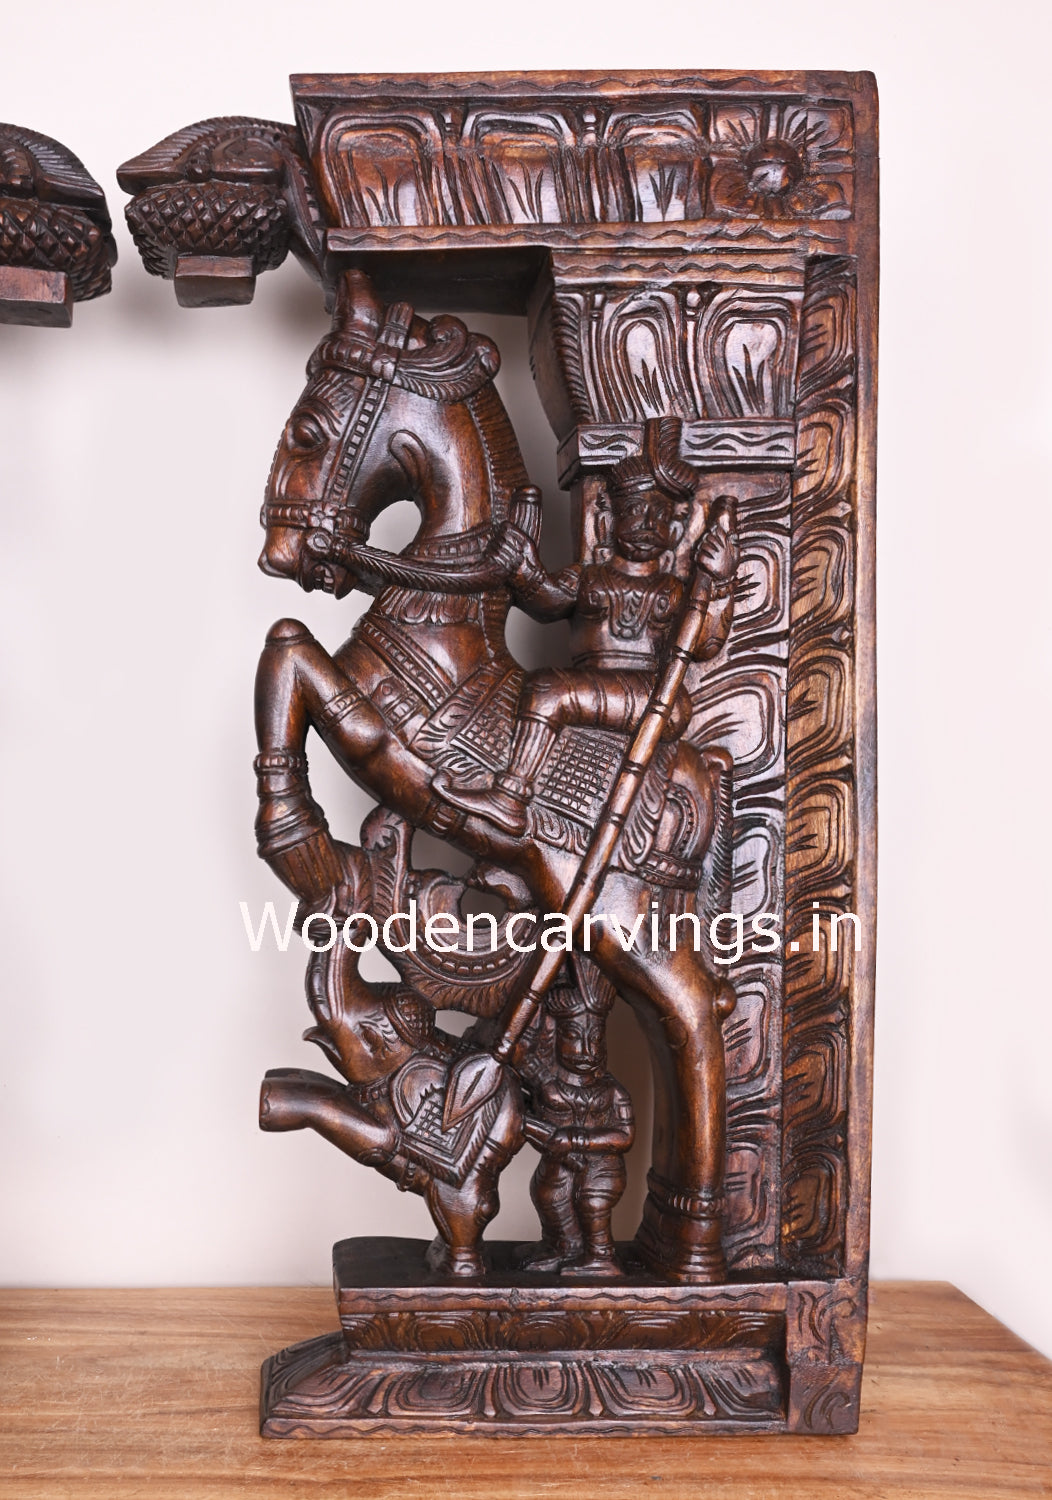 Warriors Win The Battle With Powerful Horses, Paired Elephants With Soldiers Handamade Wax Brown Brackets 30"